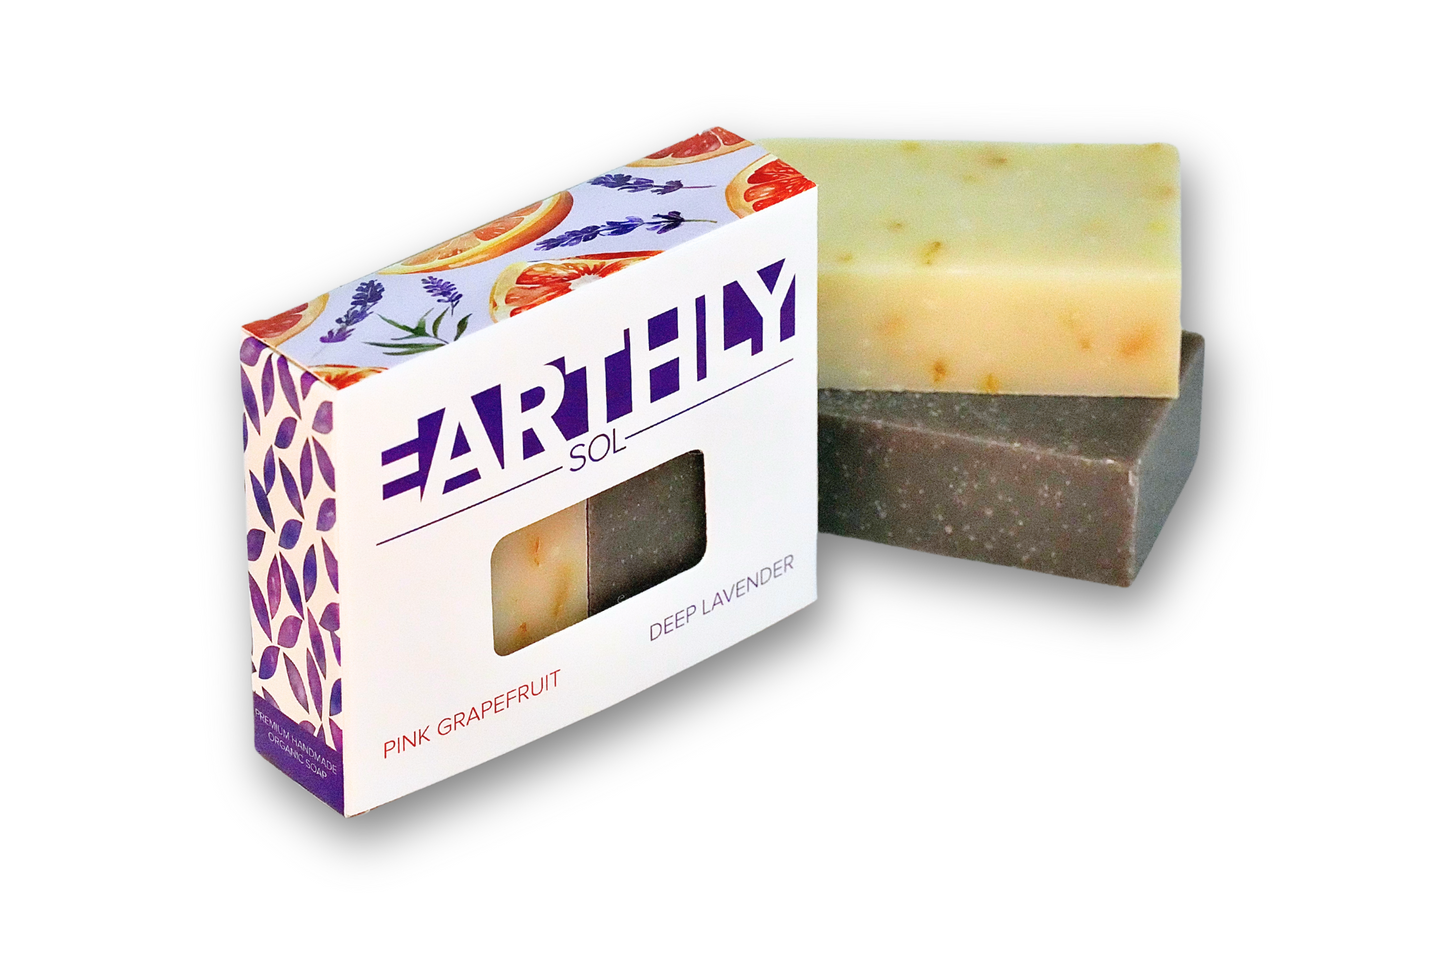 2 Premium Homemade Organic Soaps (Lavender & Grapefruit). Certified Organic. Made in the USA. Free from GMOs, Parabens, Phthalates, Alcohol, or harmful chemicals.